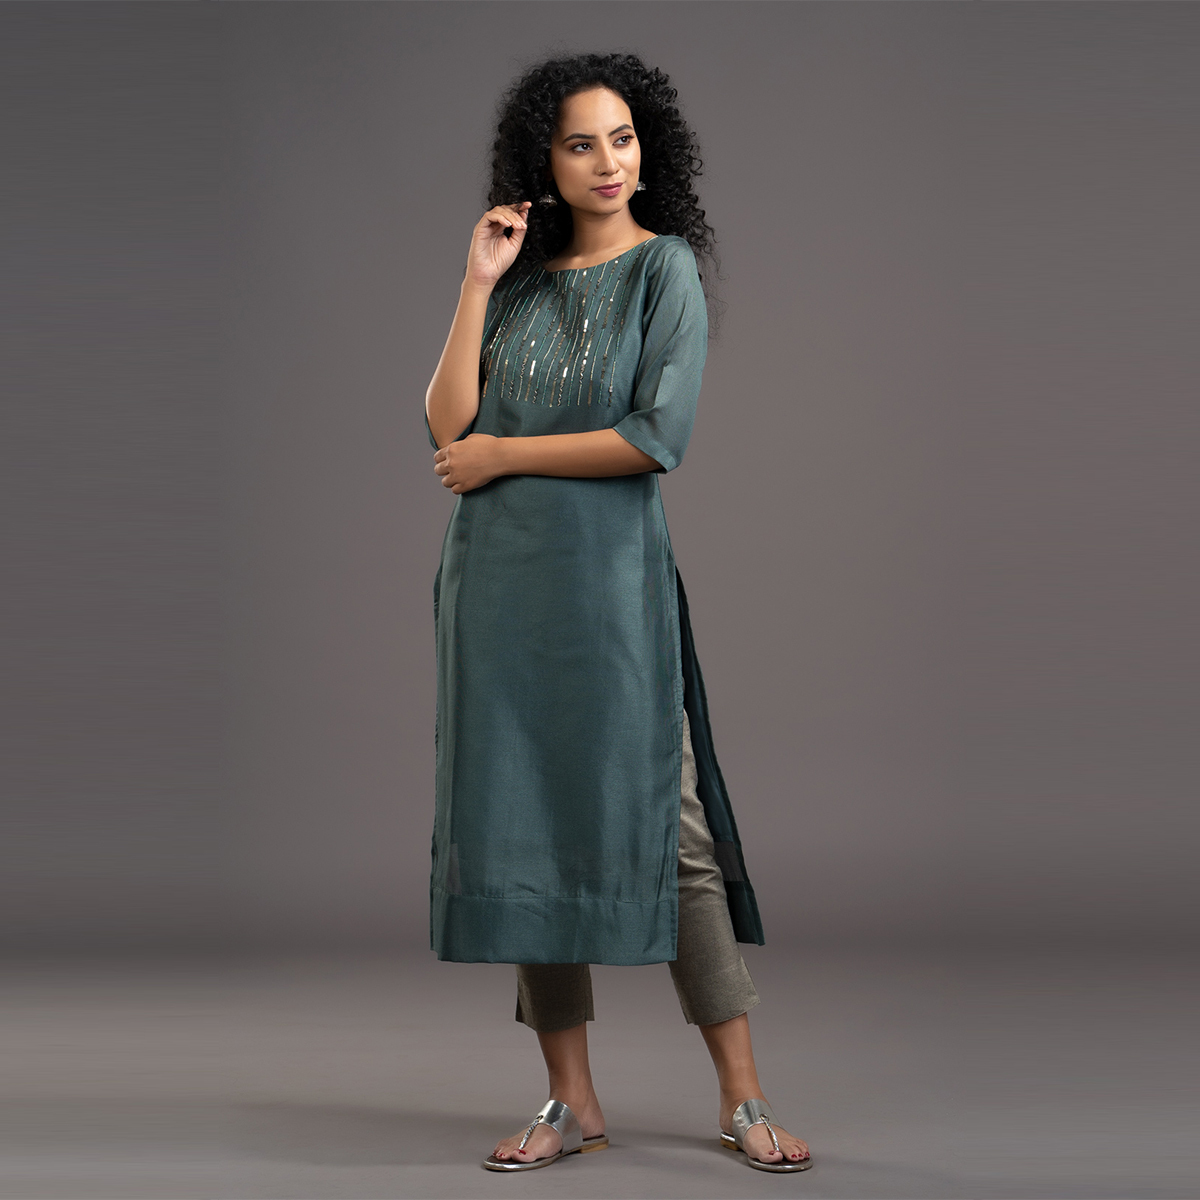 Zella Solid COlor Net Cotta Straight cut kurta with Vertical Lined Rich Embellishments on Yoke - Green